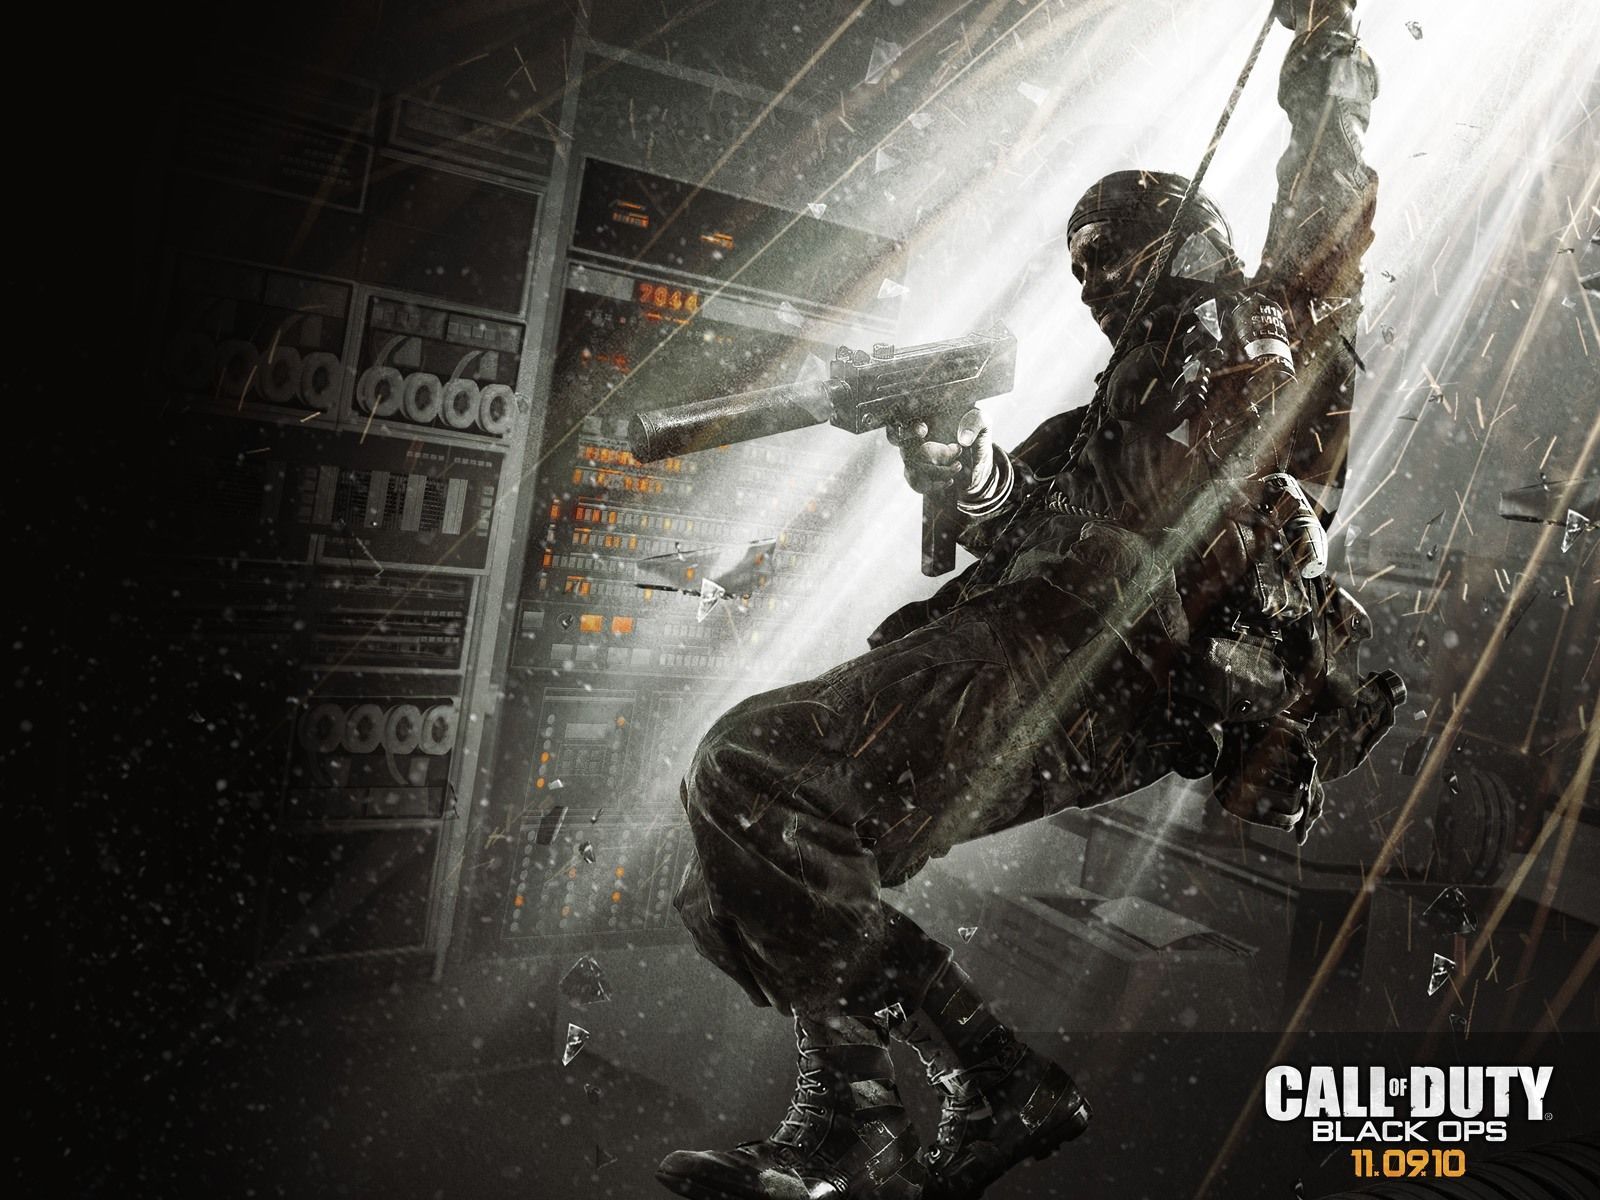 Call Of Duty Black Ops wallpaper x. Call of duty black, Black ops